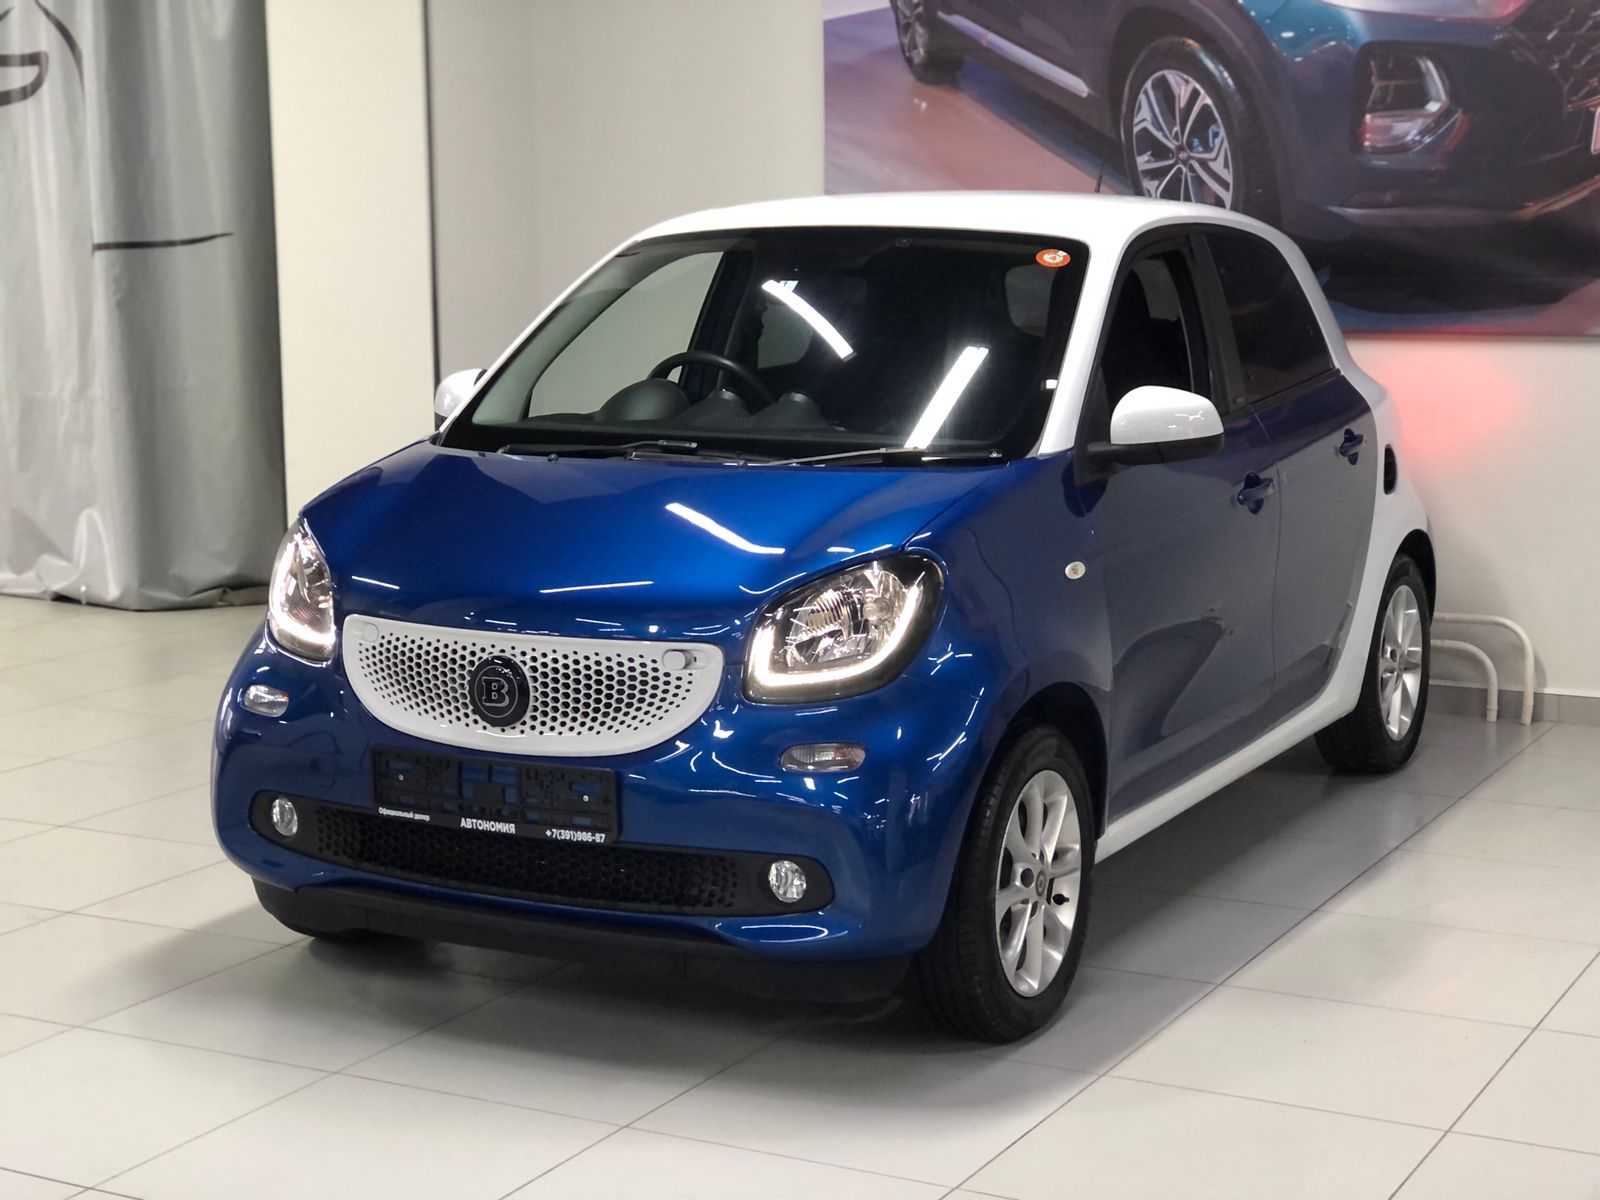 MERSEDES	SMART FORFOUR